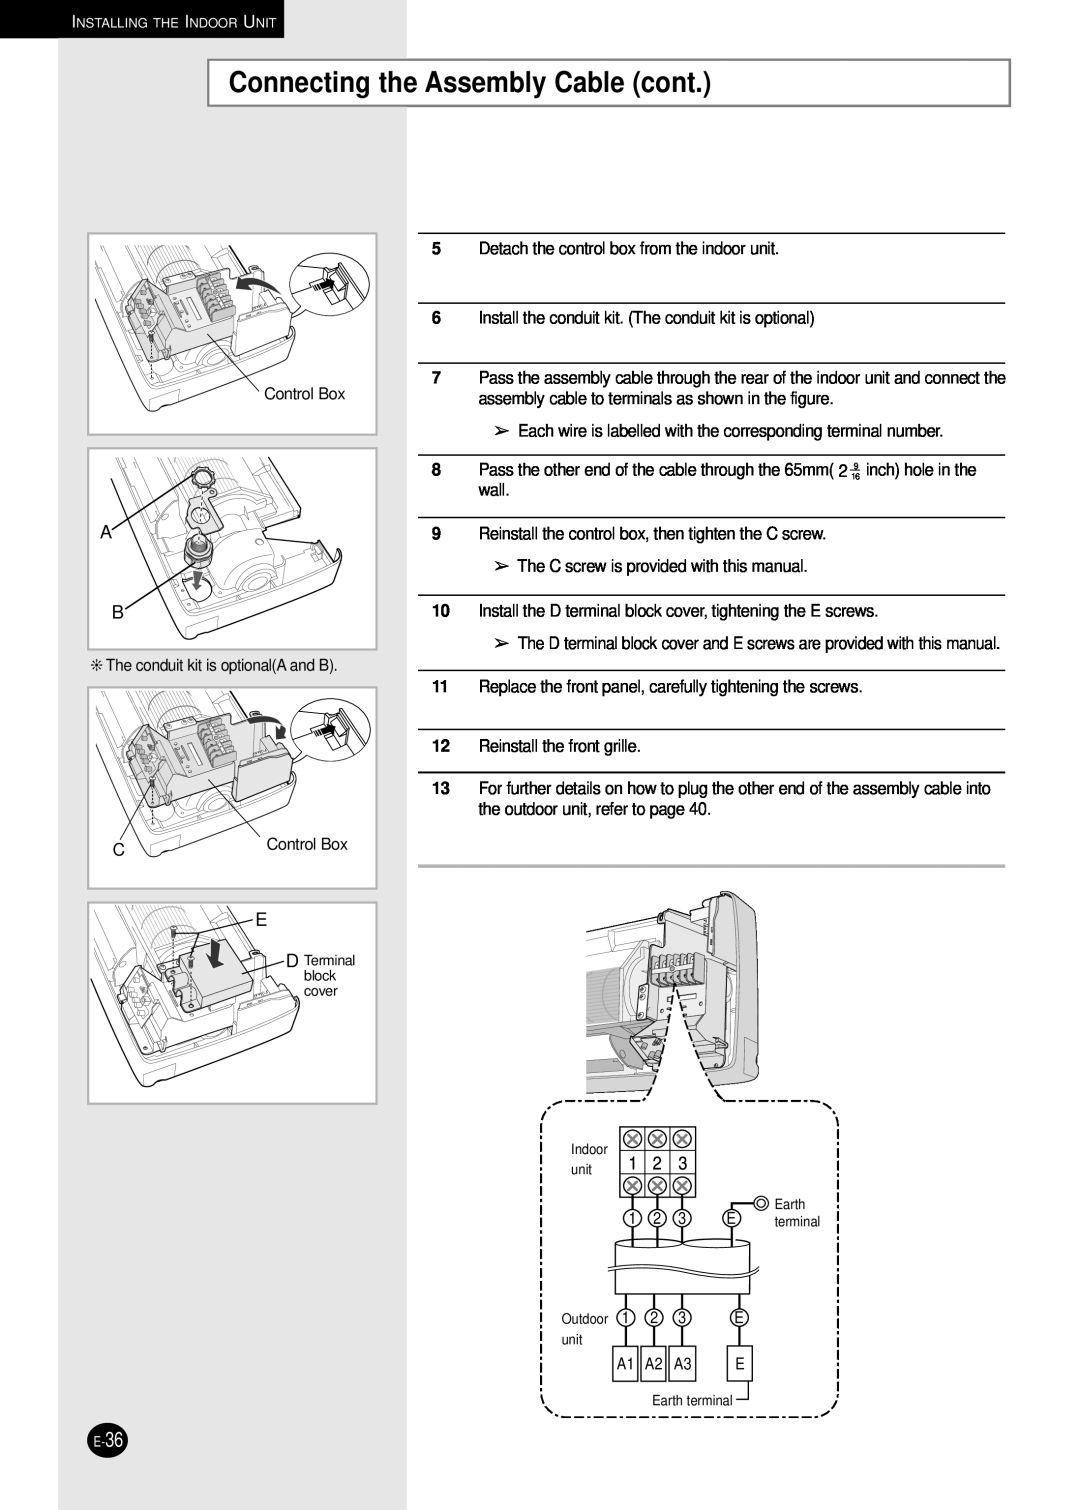 Samsung AD18B1C09 installation manual Connecting the Assembly Cable cont 